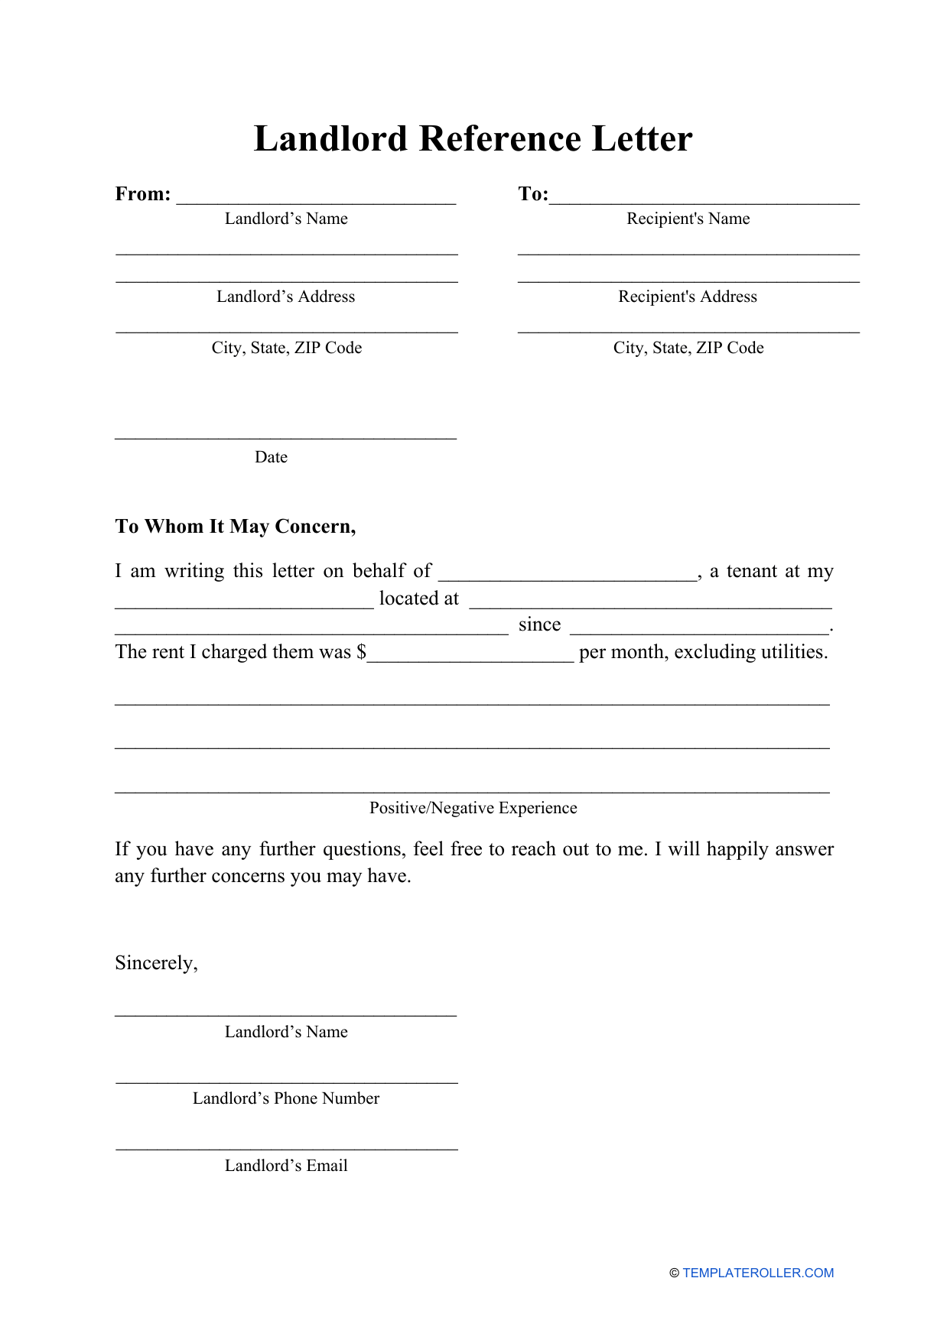 Landlord Reference Letter Template Download Printable PDF Templateroller